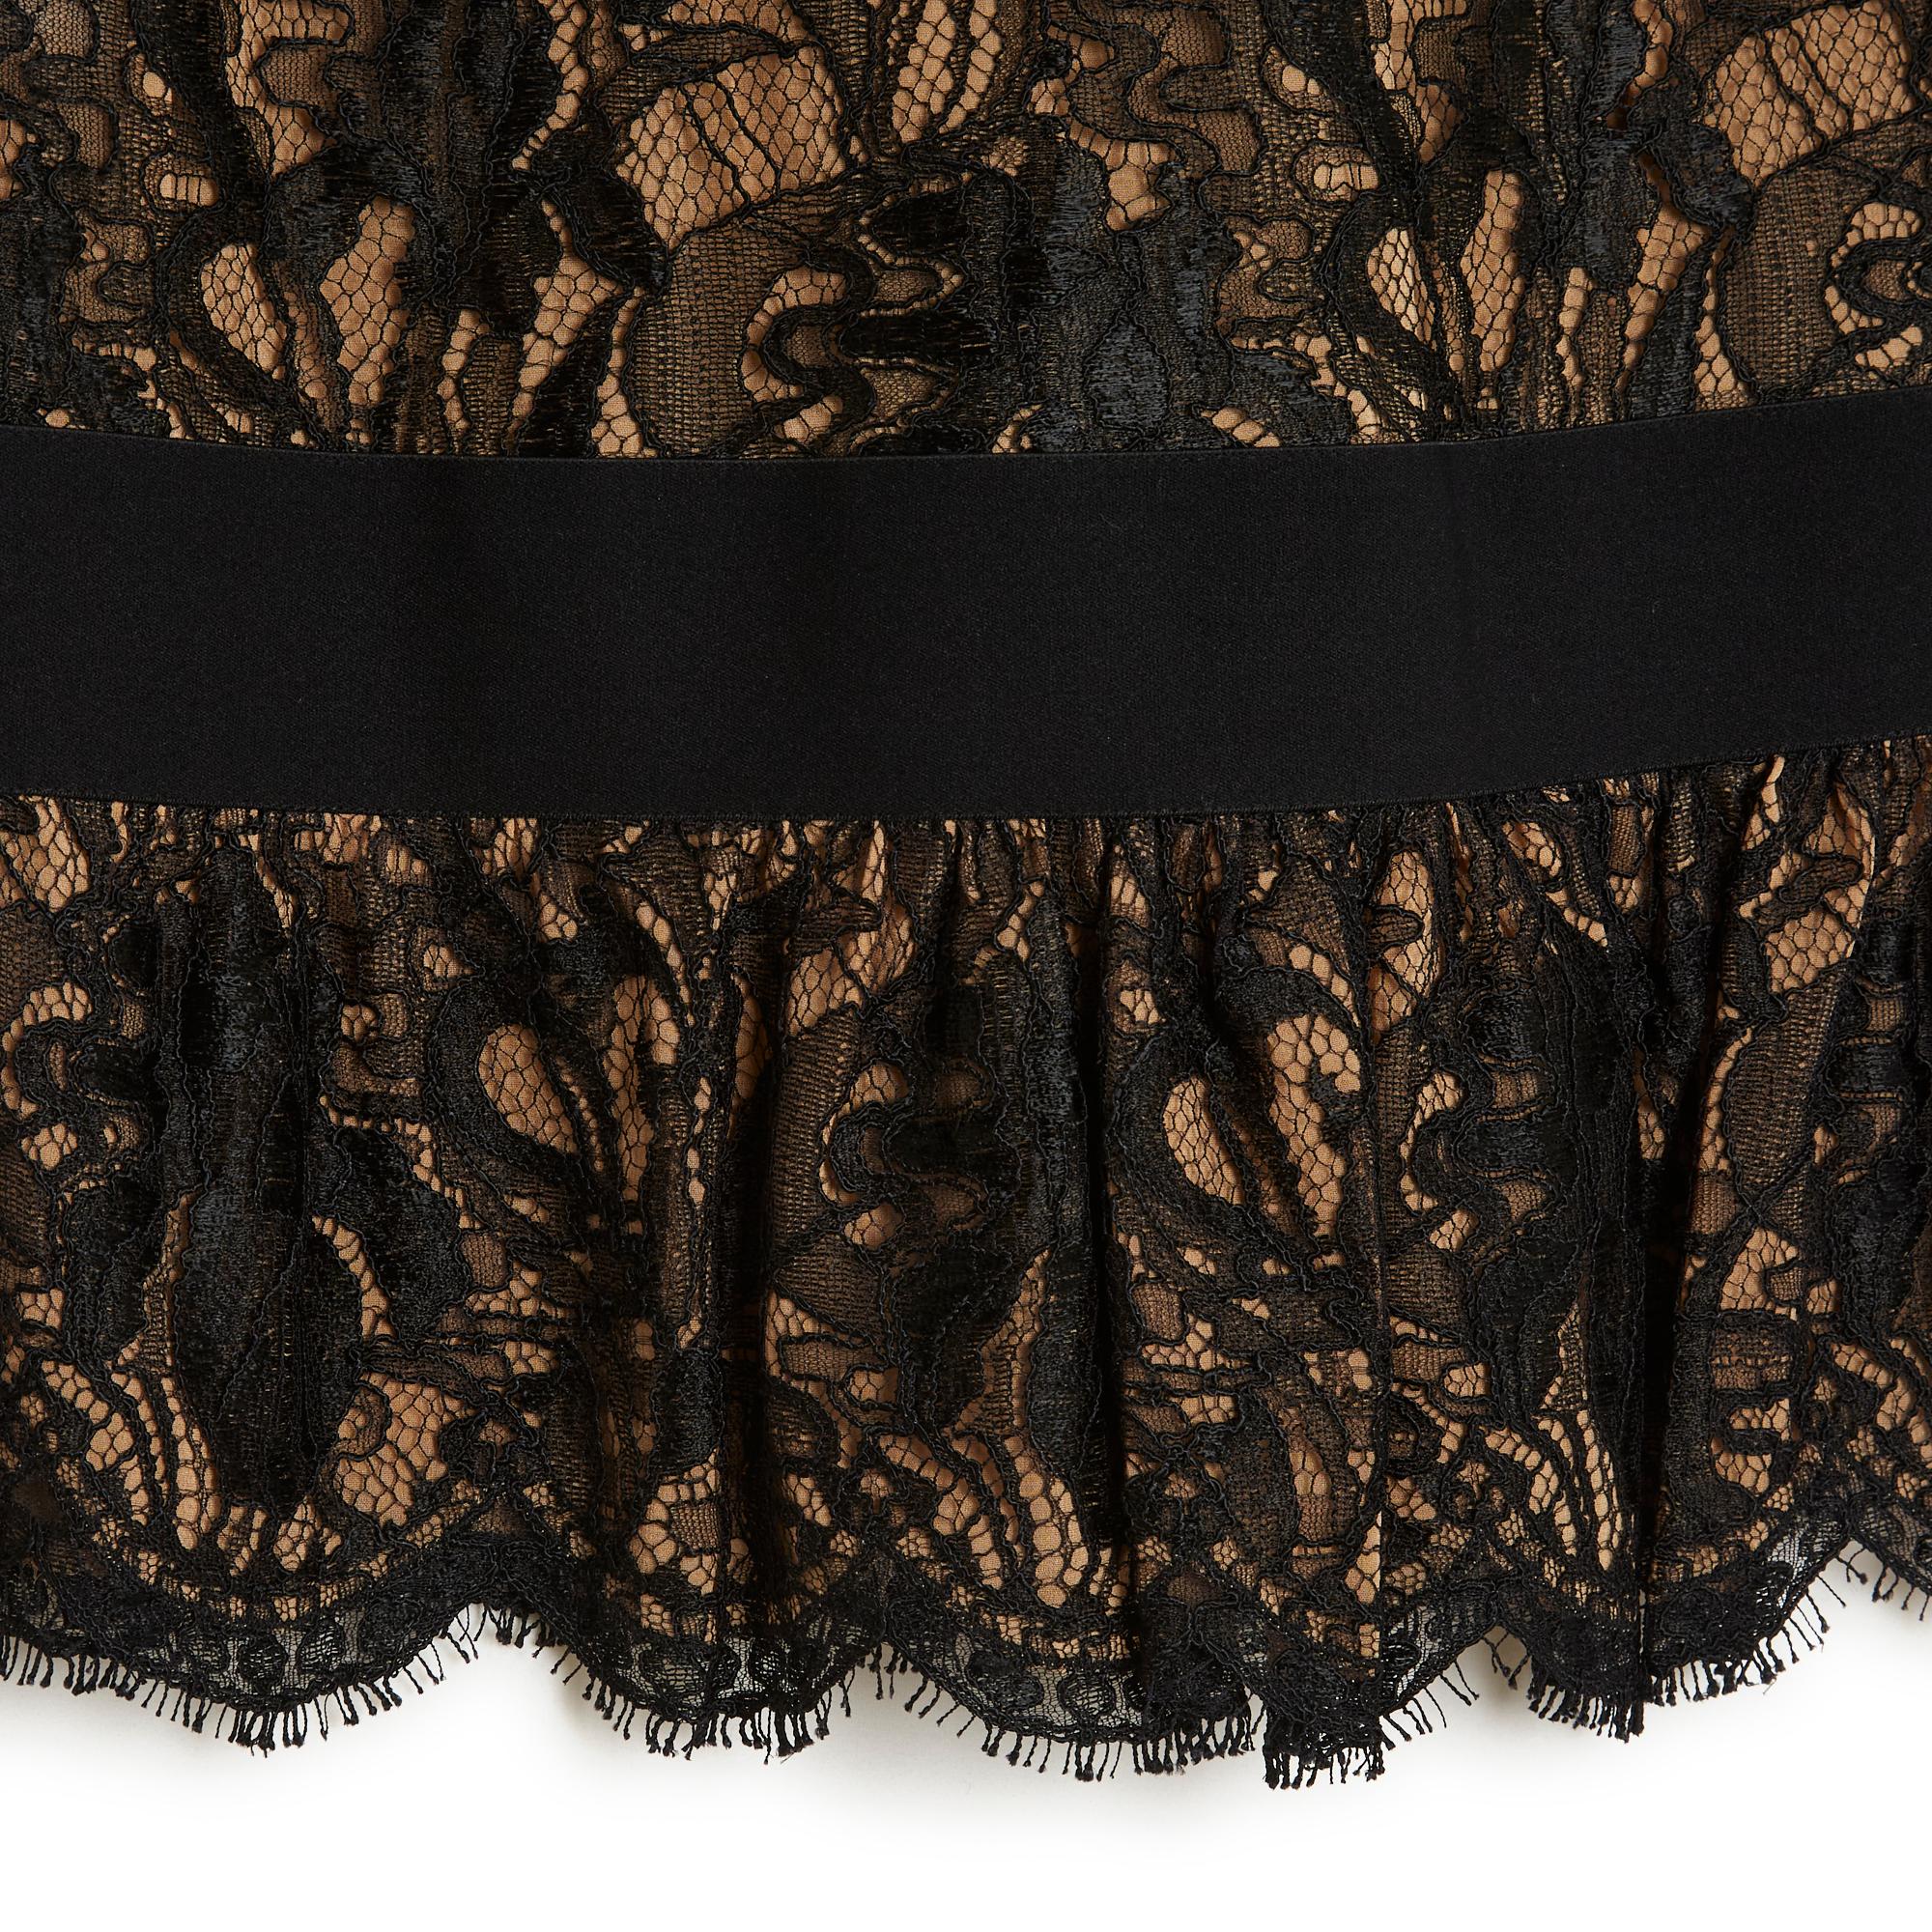 Emilio Pucci skirt in black viscose lace, straight cut decorated with a low ruffle, all mounted on flesh-colored silk crepe, high waist on a wide black elastic ribbon, fastening with a long zip on the side. Size 42FR (better in 40FR): waist 39 cm,